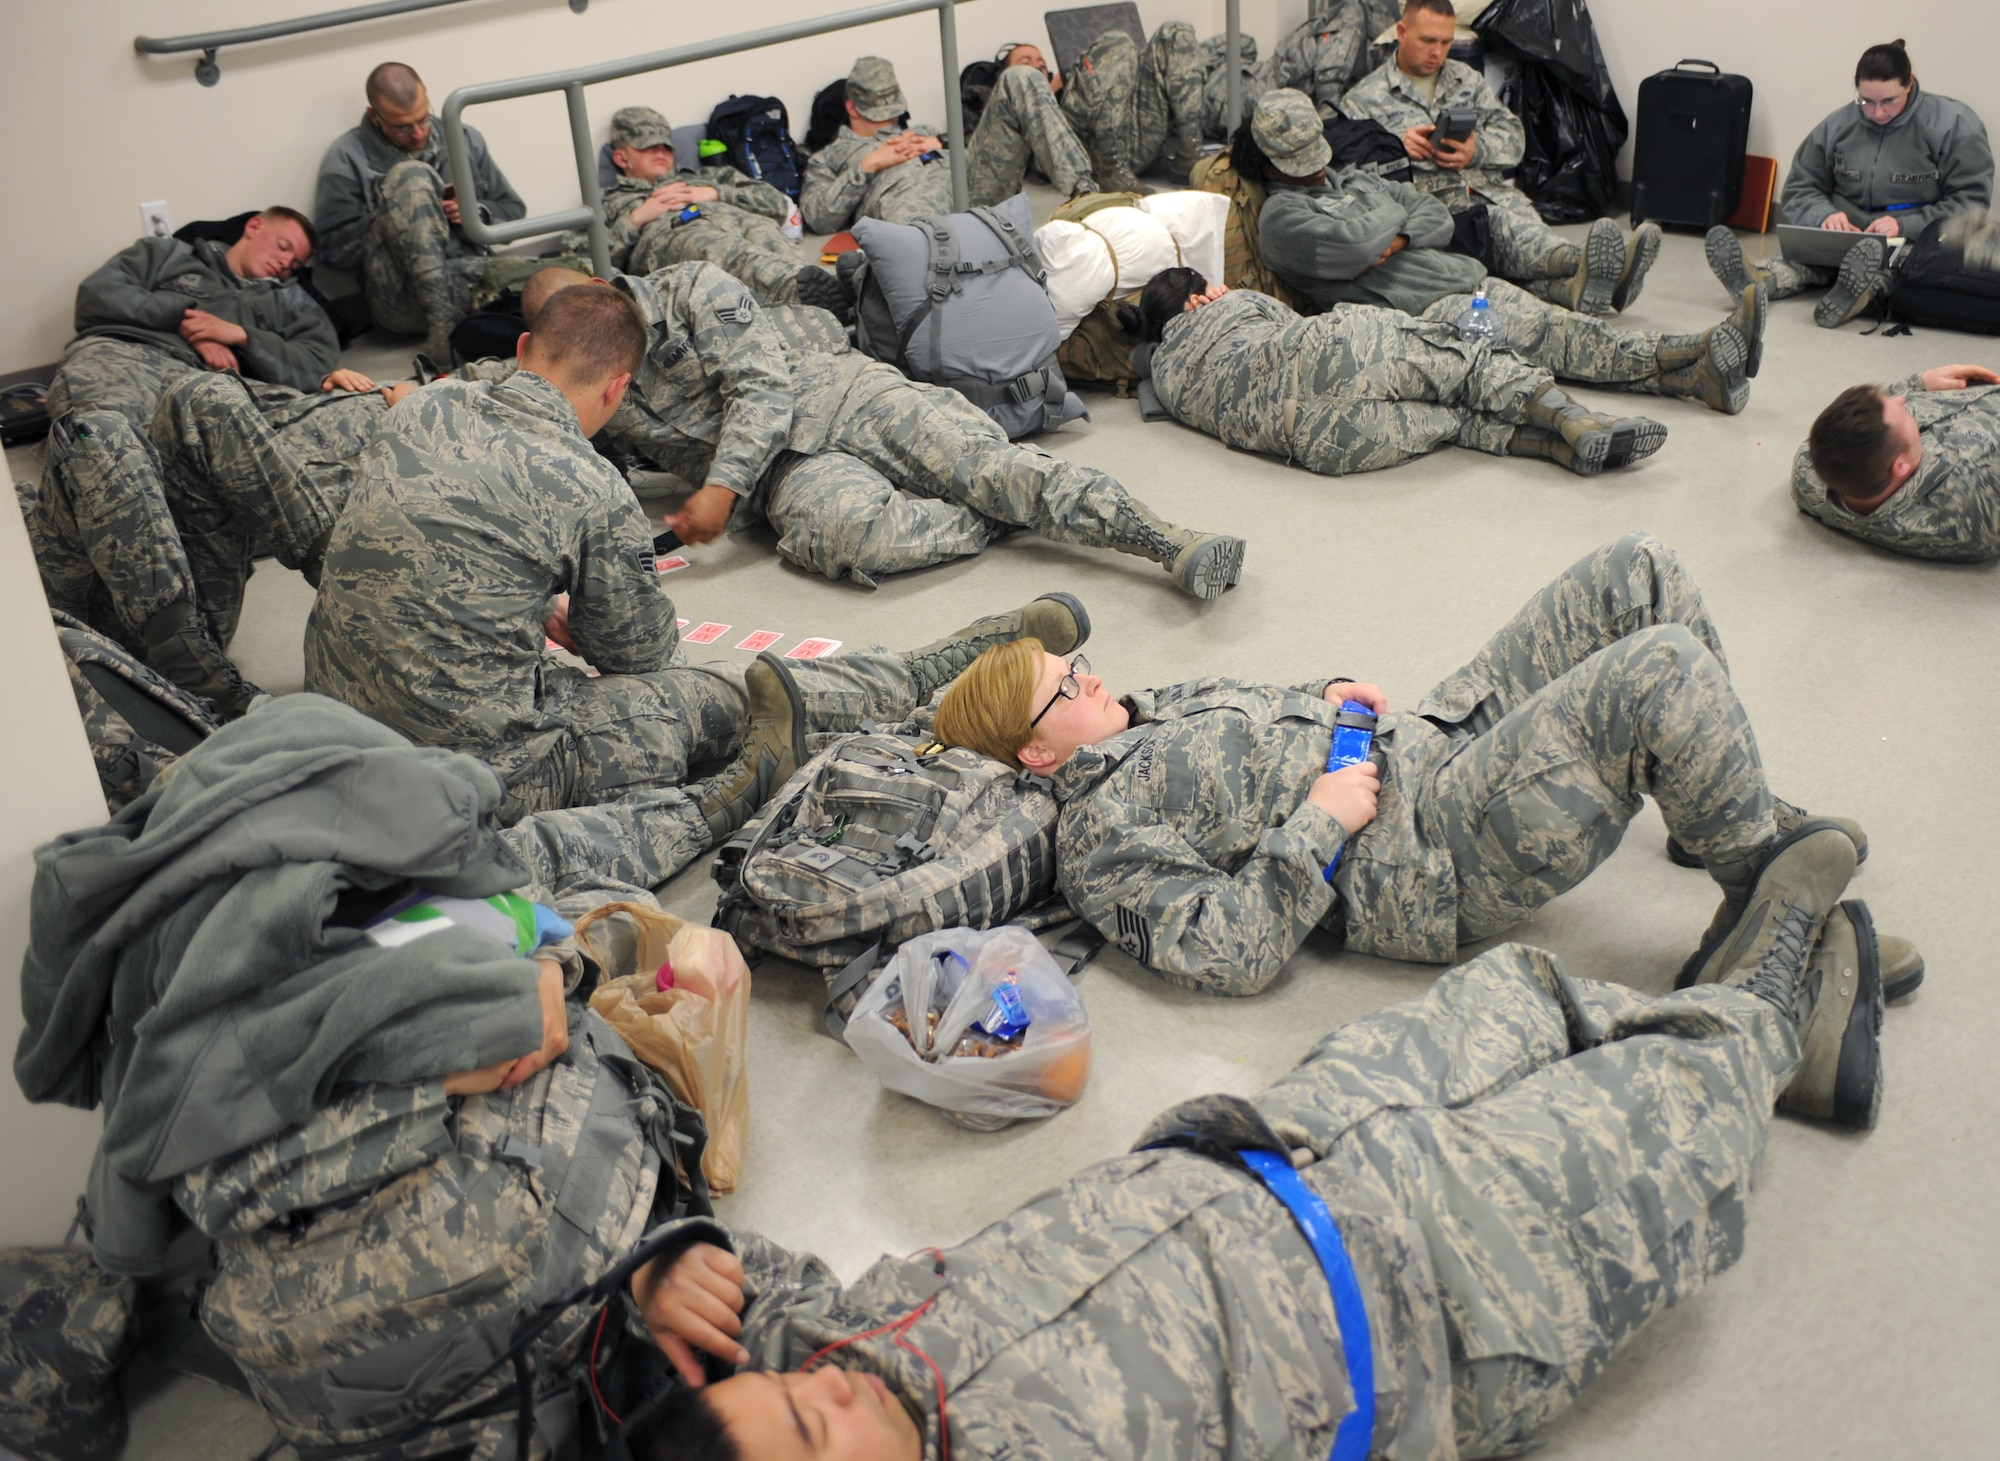 U.S. Air Force Airmen from the 366th Fighter Wing rest and relax while waiting to board the plane before their deployment April 23, 2013, at Mountain Home Air Force Base, Idaho.  The Mountain Home Airmen will support F-15E overseas contingency missions designed to deliver combat air power for joint operations and to meet ground commander requirements. (U.S. Air Force photo by Senior Airman Benjamin Sutton/Released)